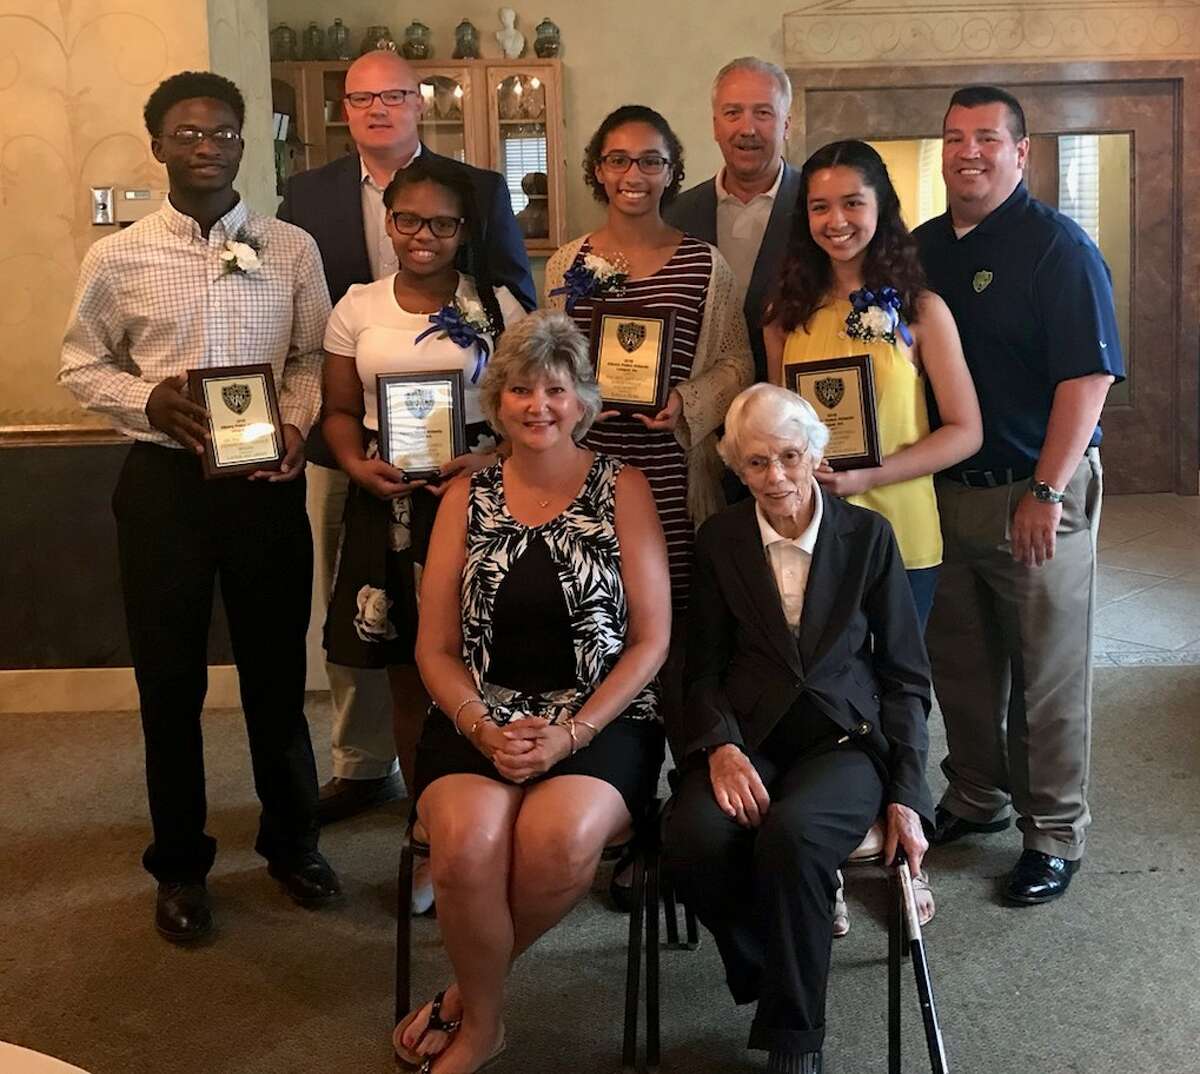 Kayla Huba (center, back row) is the 2018 Art Mitchell/Albany Police Athletic League scholarship winner, and Xavier McCarthy (back row, left) is 2018 Dr. Pat Peterson Community Service Award Winner.